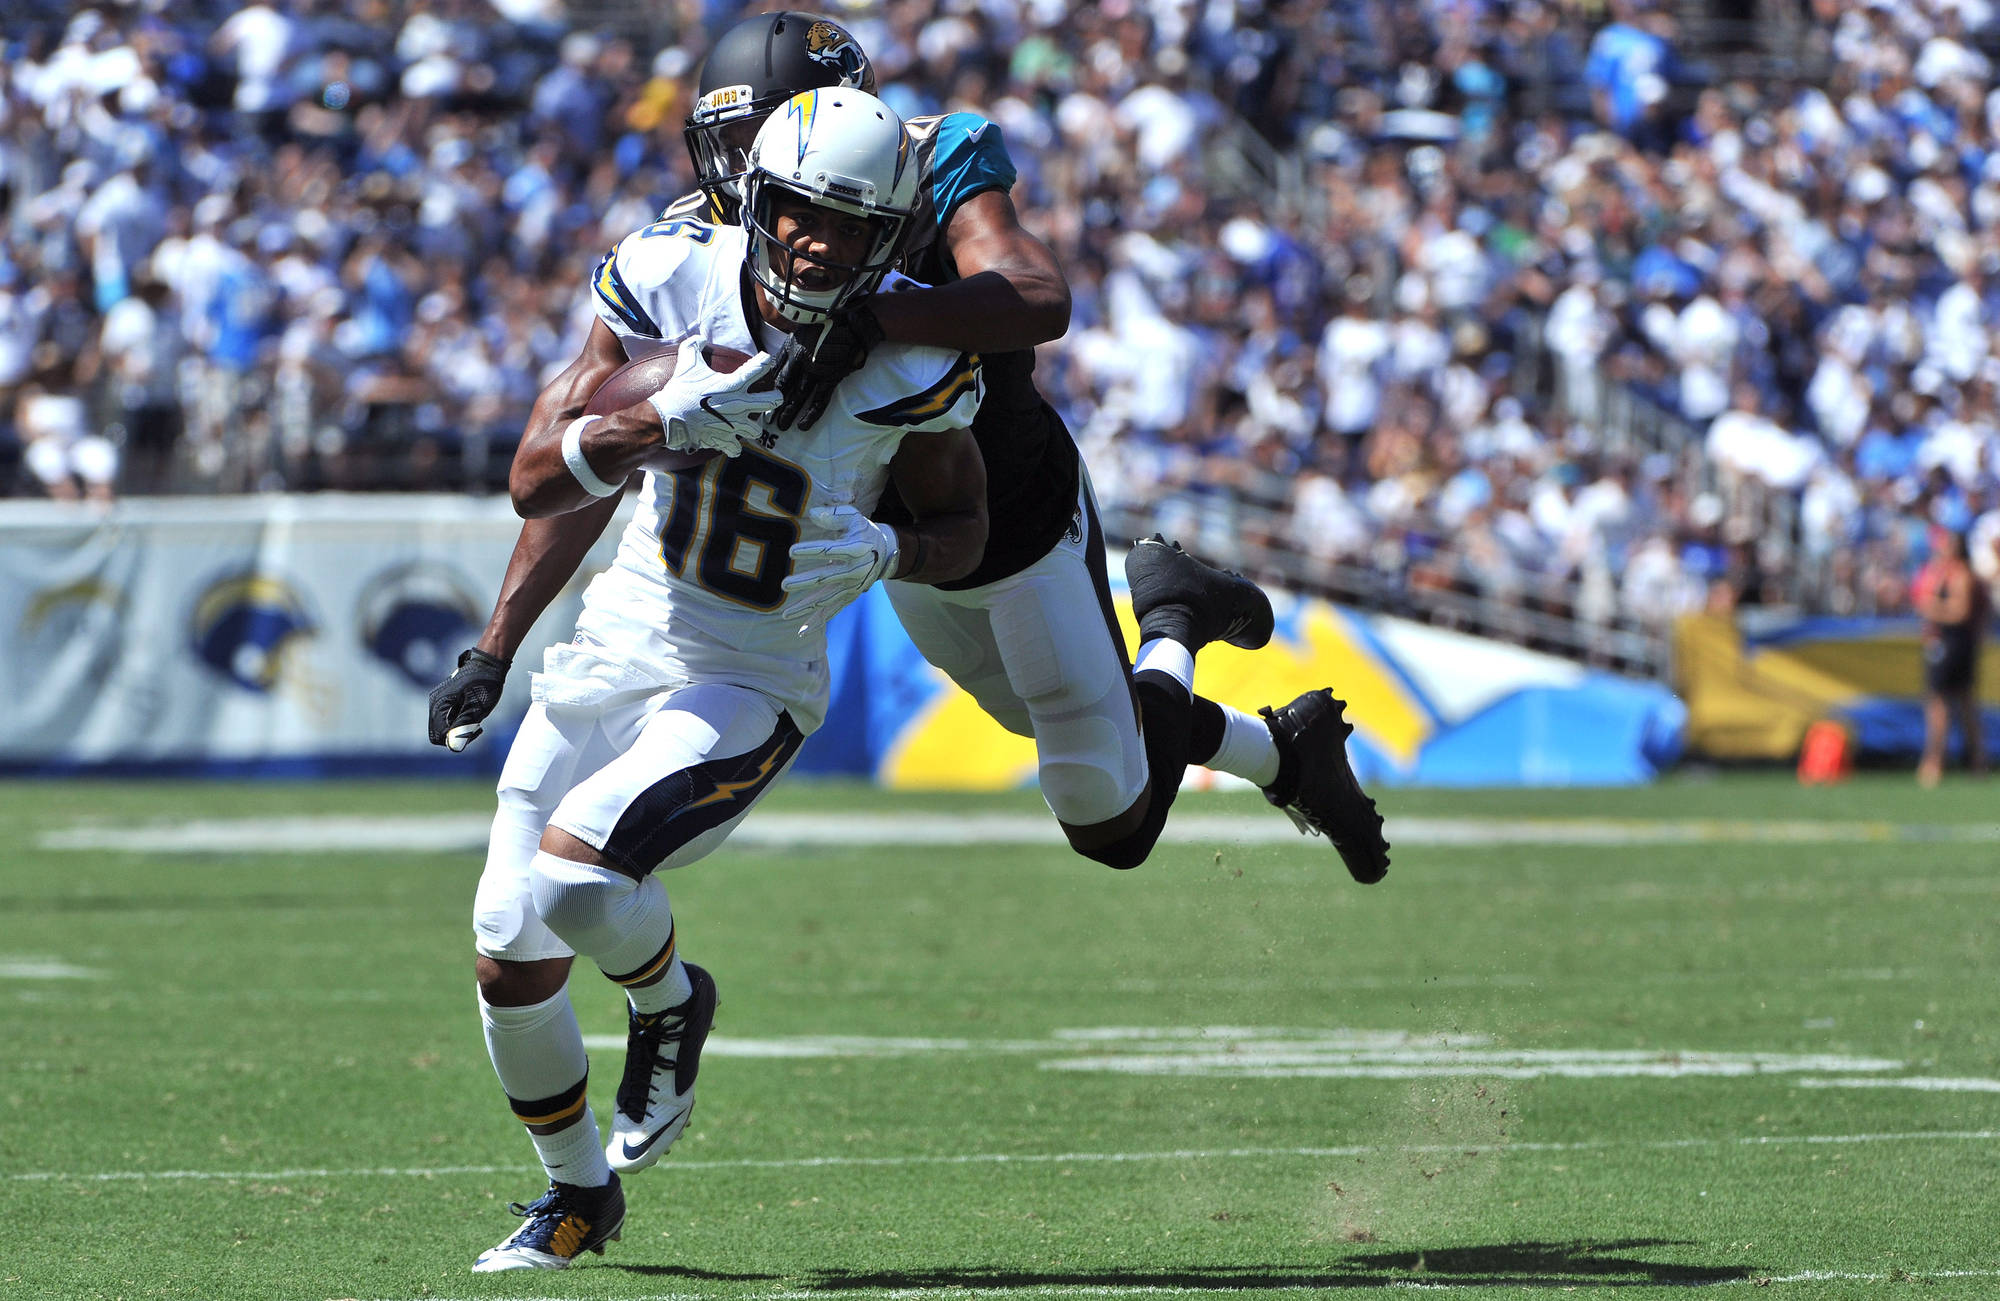 NFL Fantasy: Tyrell Williams is a sleeper pickup